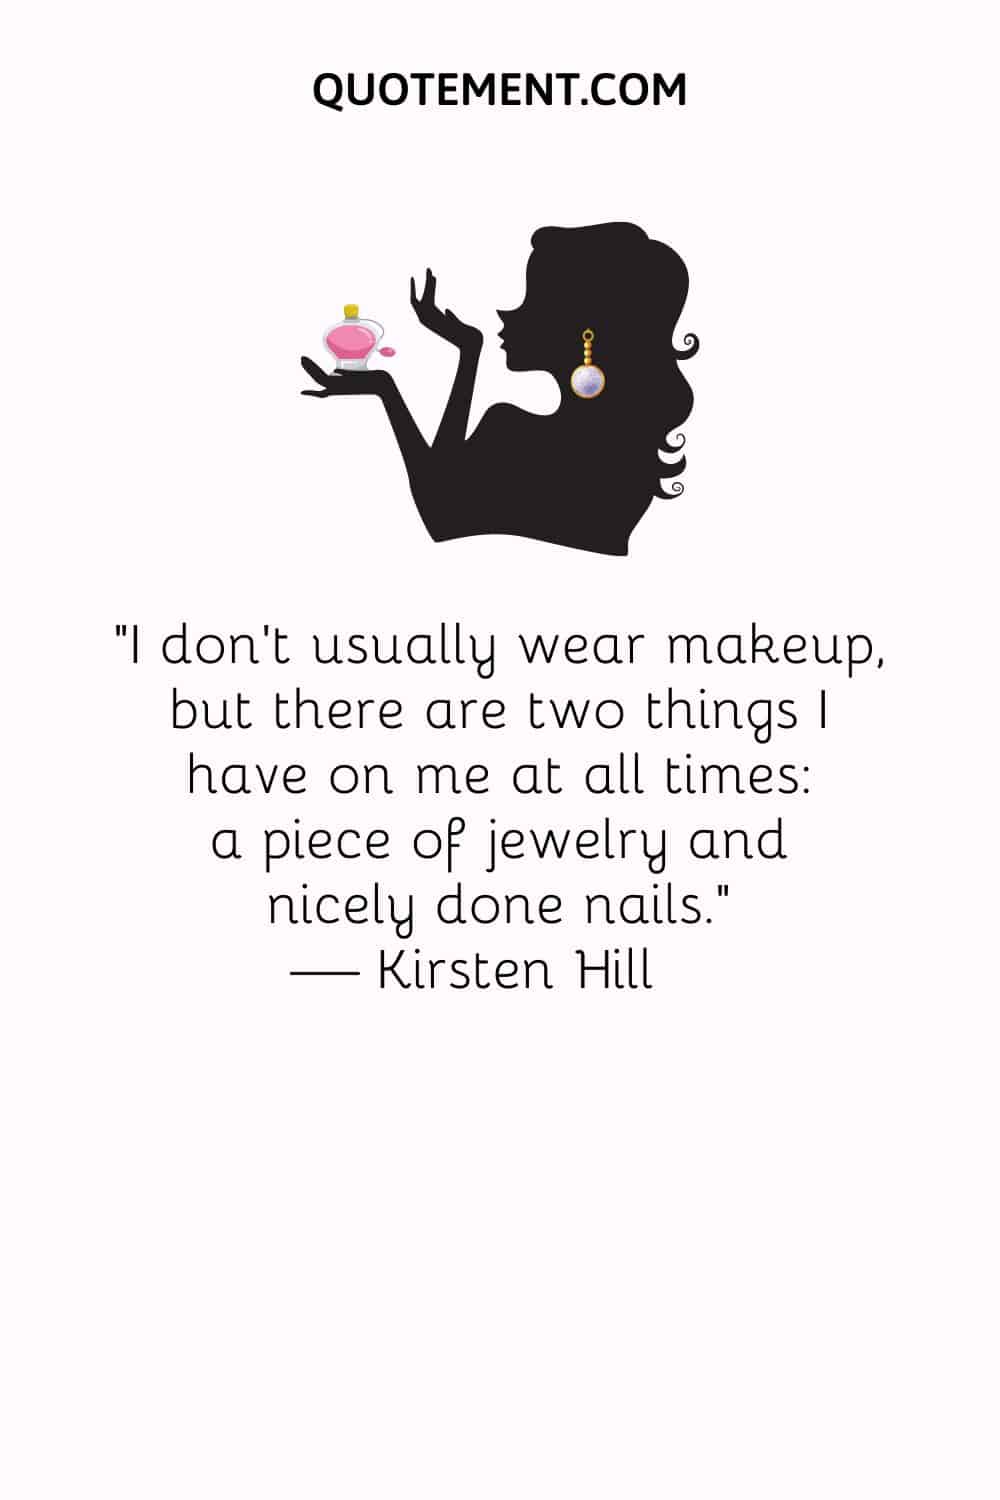 I don’t usually wear makeup, but there are two things I have on me at all times a piece of jewelry and nicely done nails